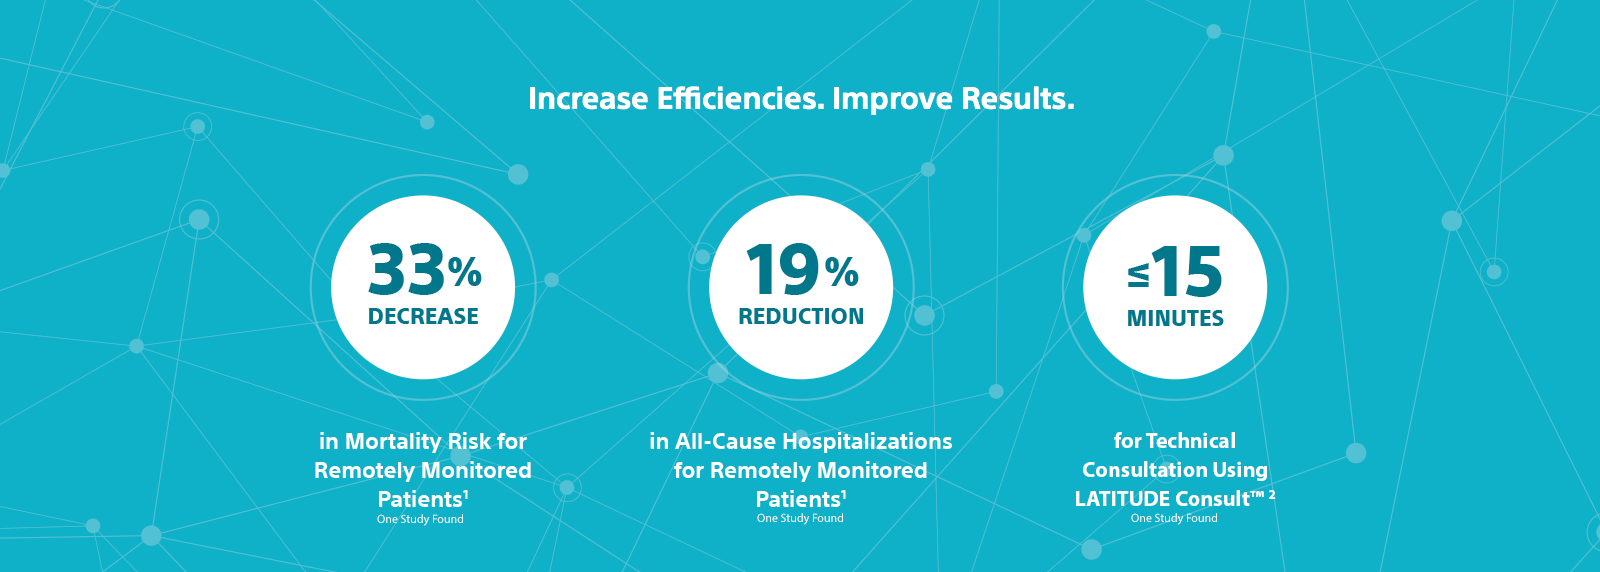 Graphic showing a 33% decrease in mortality risk for remotely monitored patients, a 19% reduction in all-cause hospitalizations for remotely monitored patients, and ≤15 minutes for technical consultation using LATITUDE Consult™